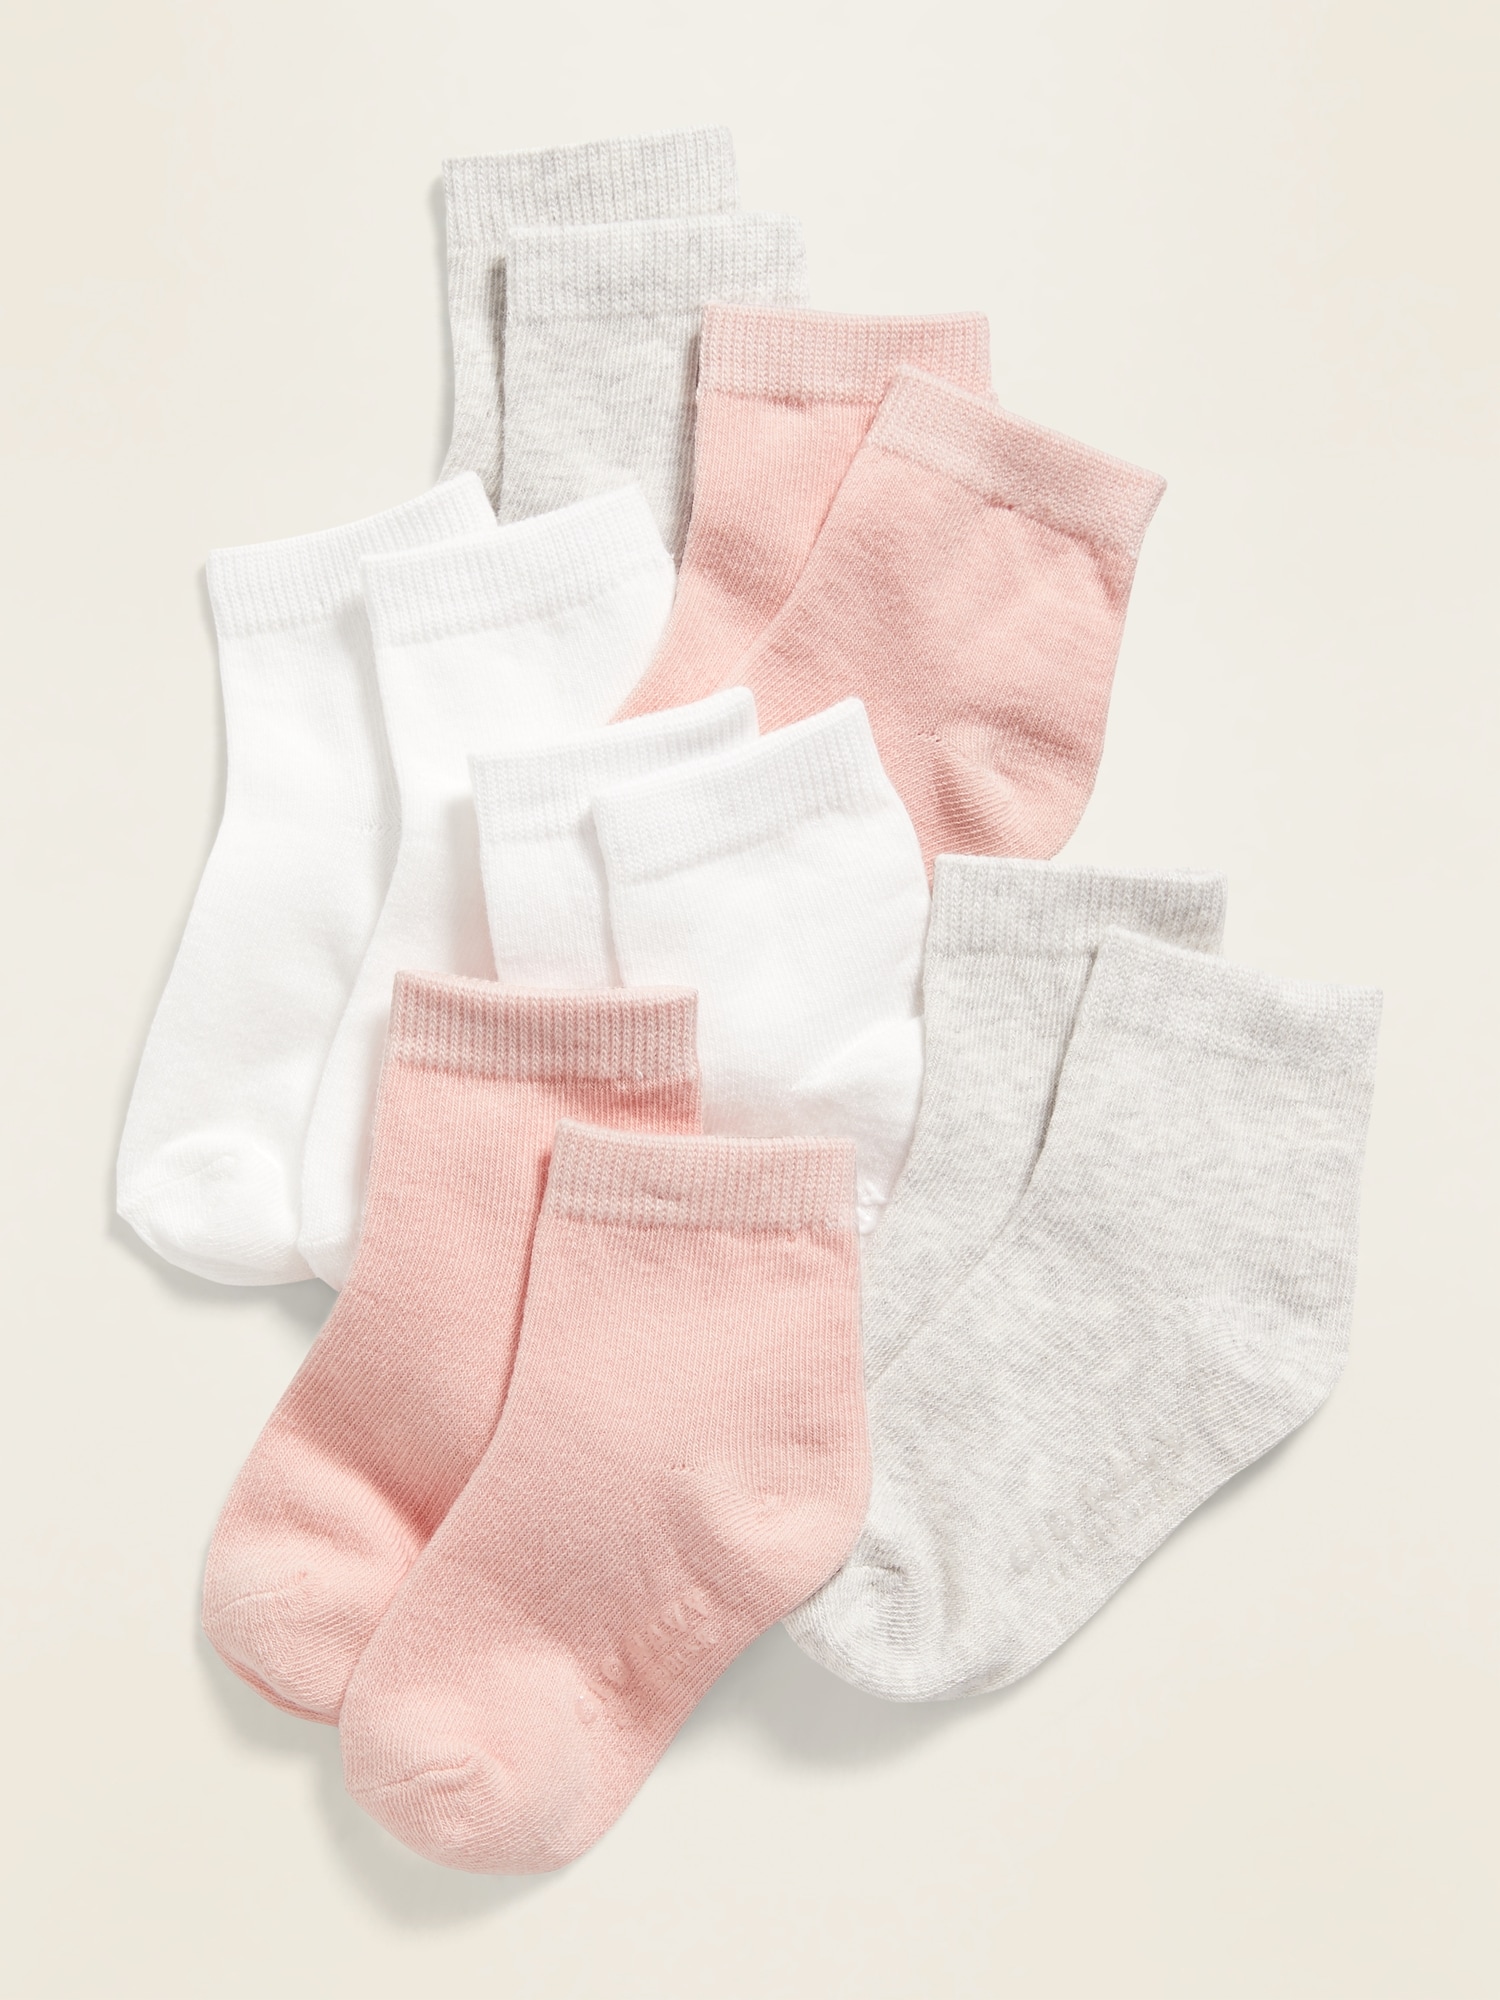 Choice of Color L M Boy's Old Navy Thick Crew Socks S 